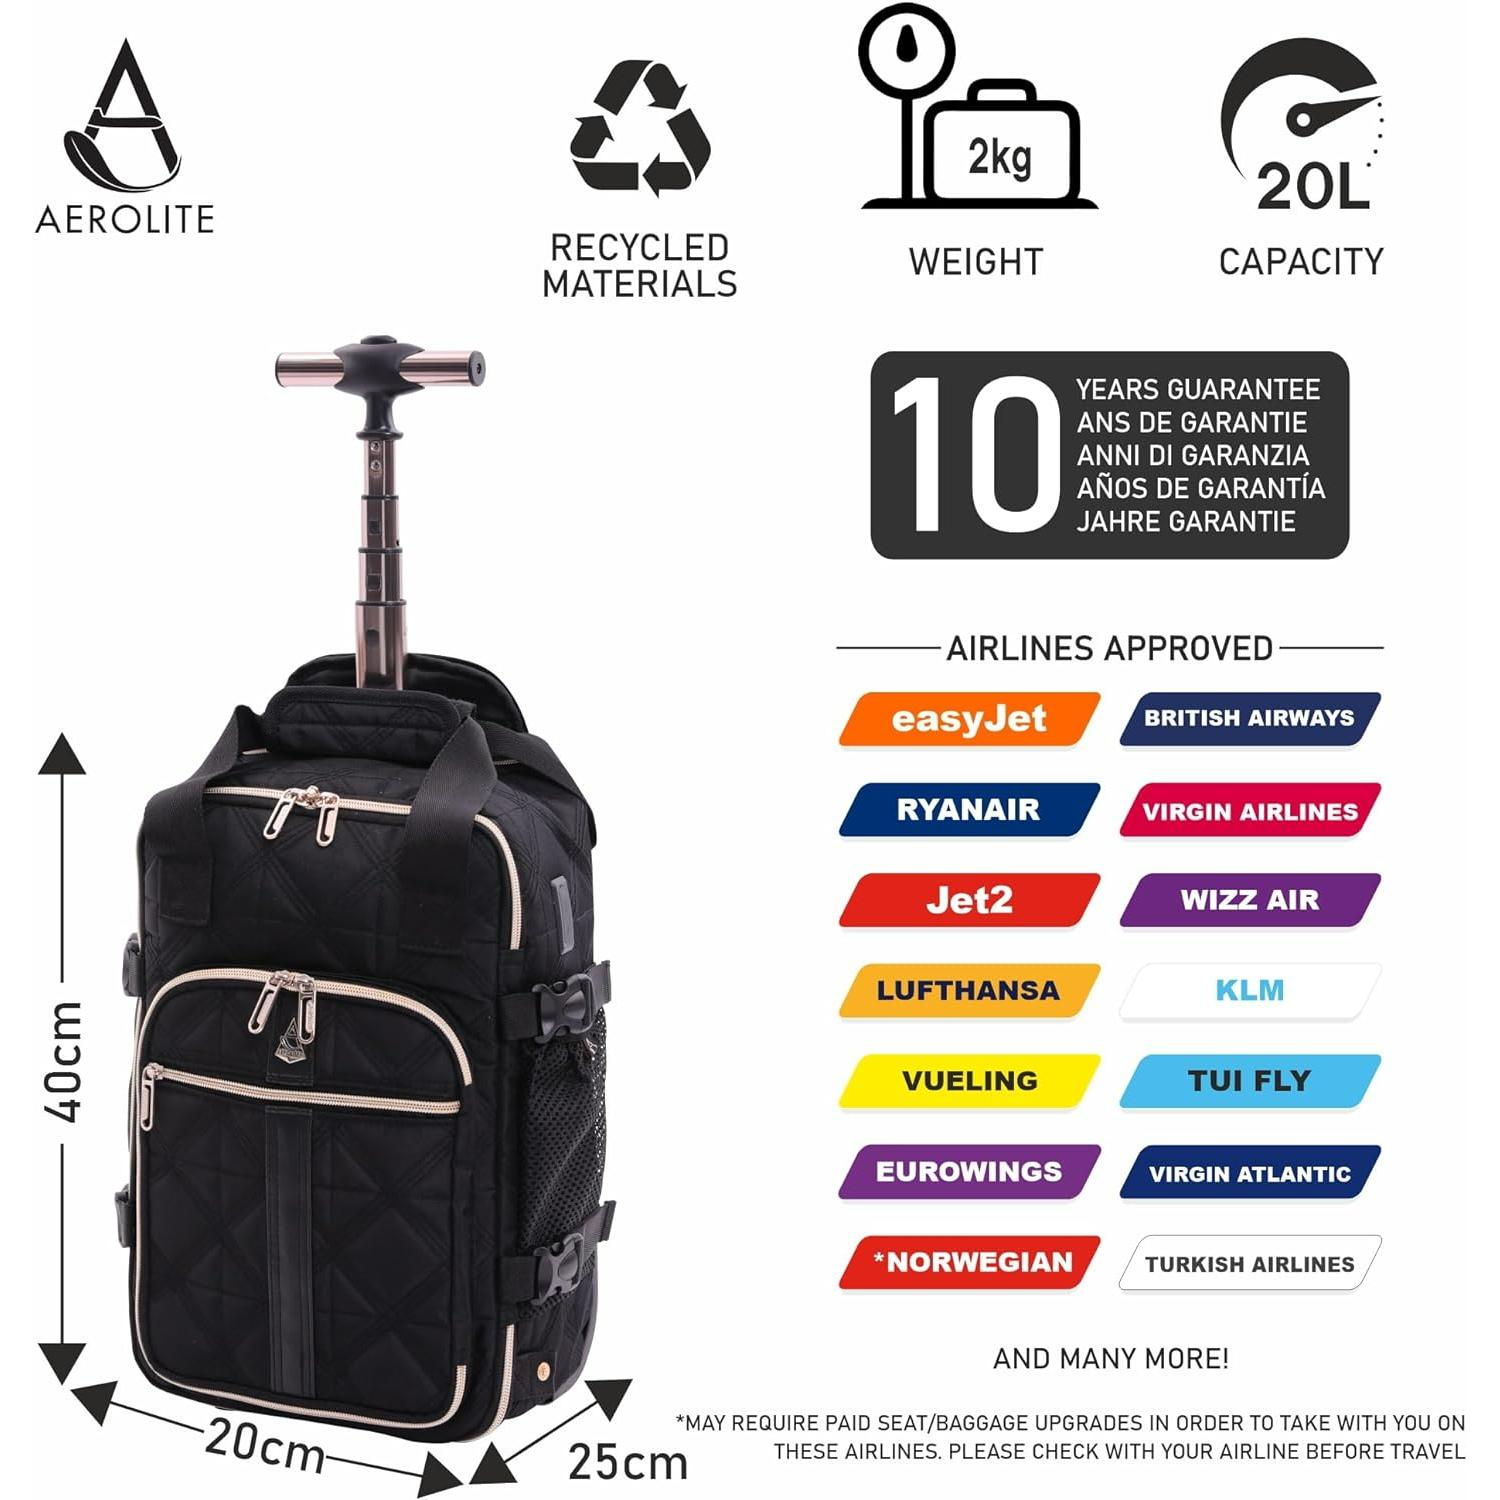 Aerolite 40x20x25 Ryanair Maximum Size Backpack Trolley Bag with 2 Wheels Eco-Friendly Cabin Luggage Approved Extendable Handle Travel Carry On Holdall Flight Rucksack with 10 Year Warranty (Quilted) - Aerolite UK